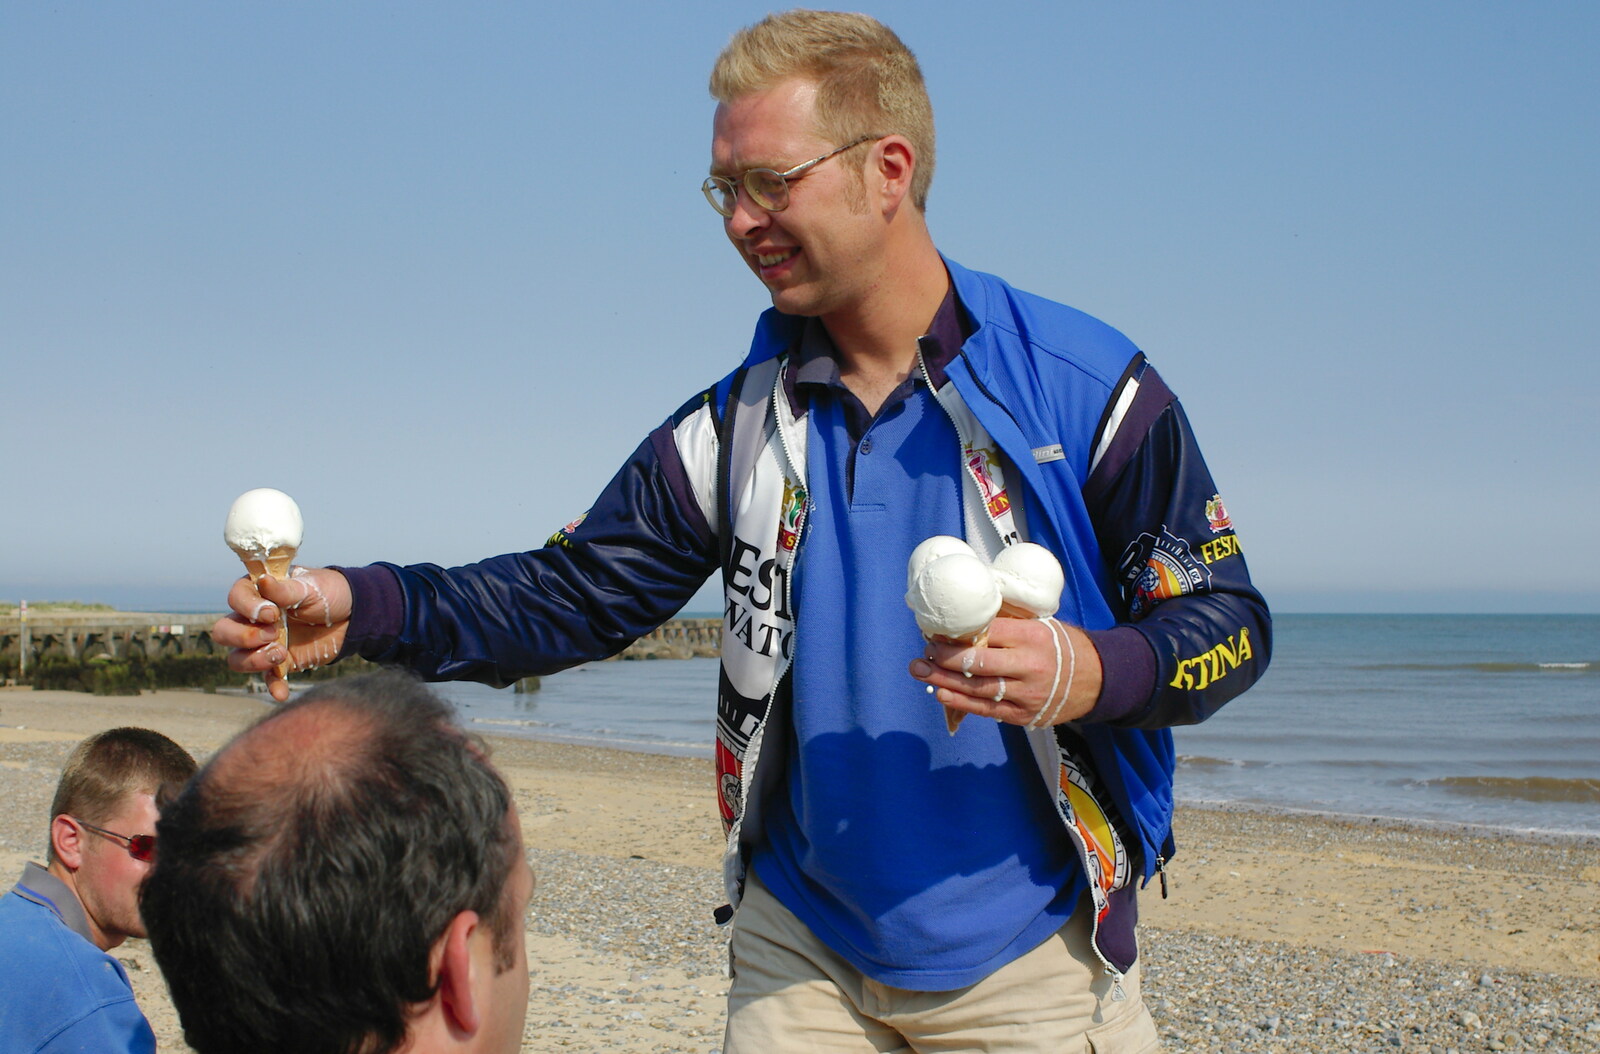 Marc brings more ice creams from The BSCC Charity Bike Ride, Walberswick, Suffolk - 9th July 2005